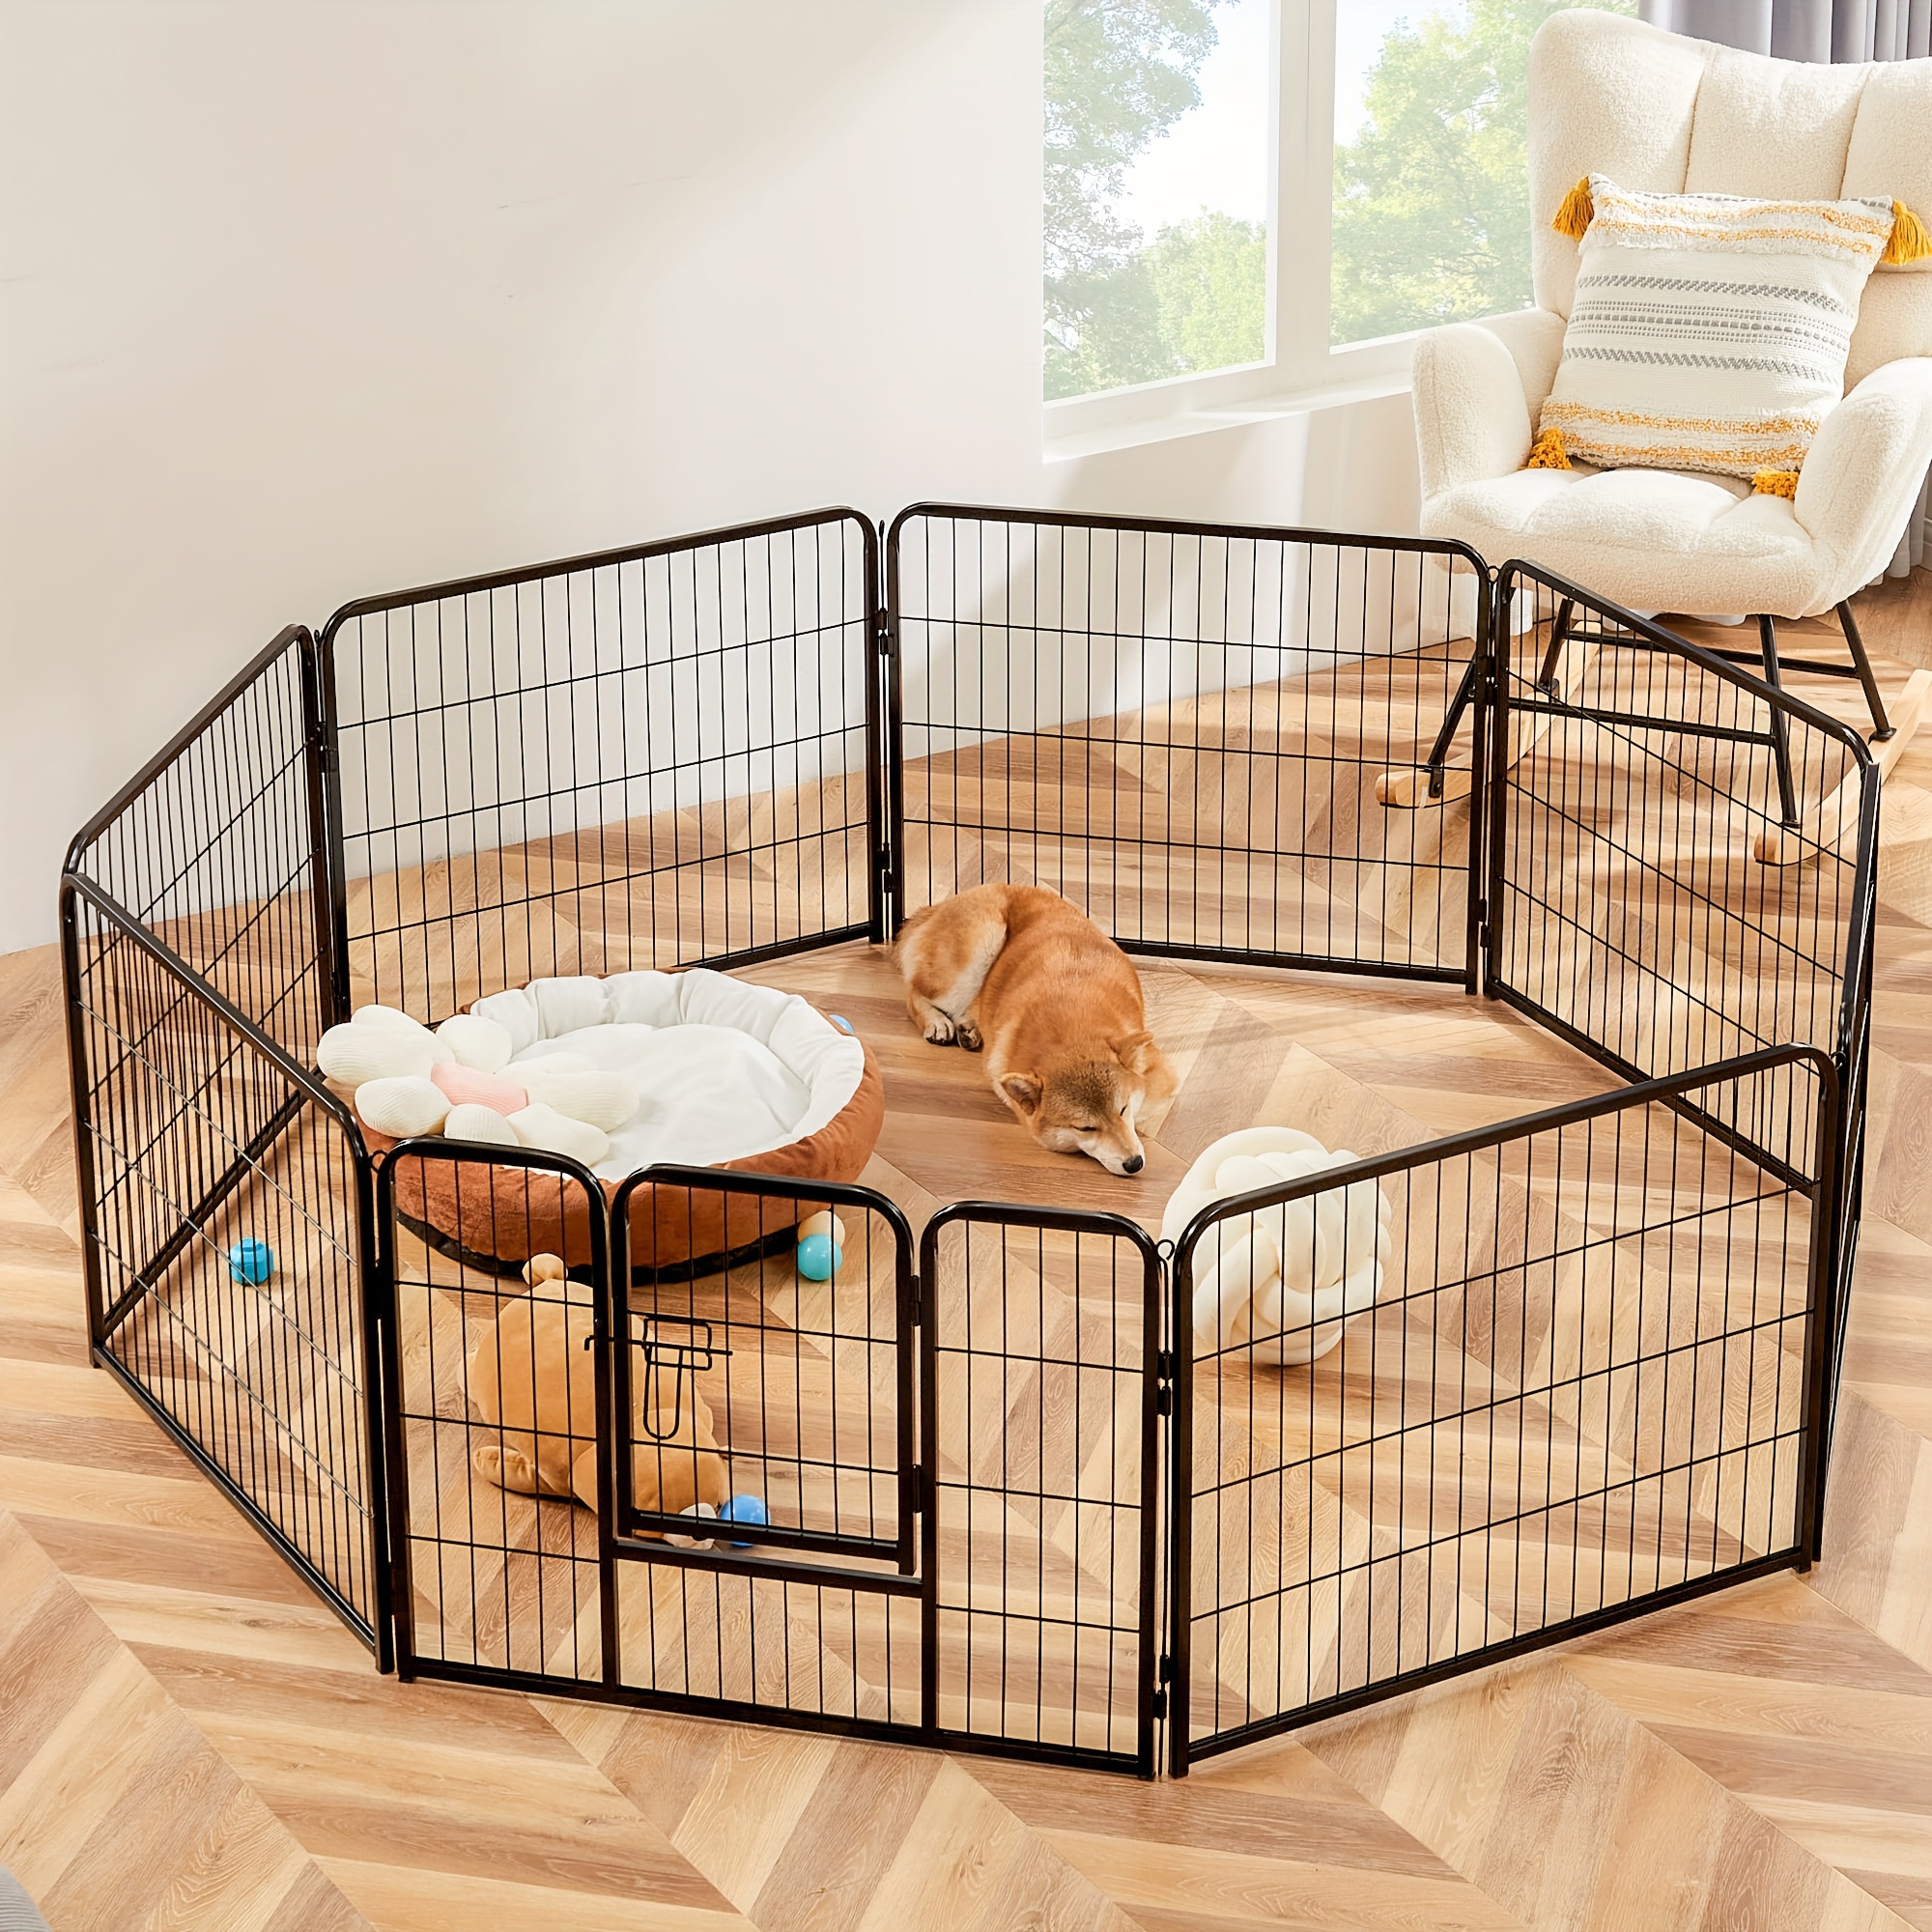 

Dog Playpen Indoor Pet Fence Outdoor 8 Panel Metal Exercise Puppy Pen With Door For Large/medium/small Dogs Portable For Garden, Yard, Rv Camping